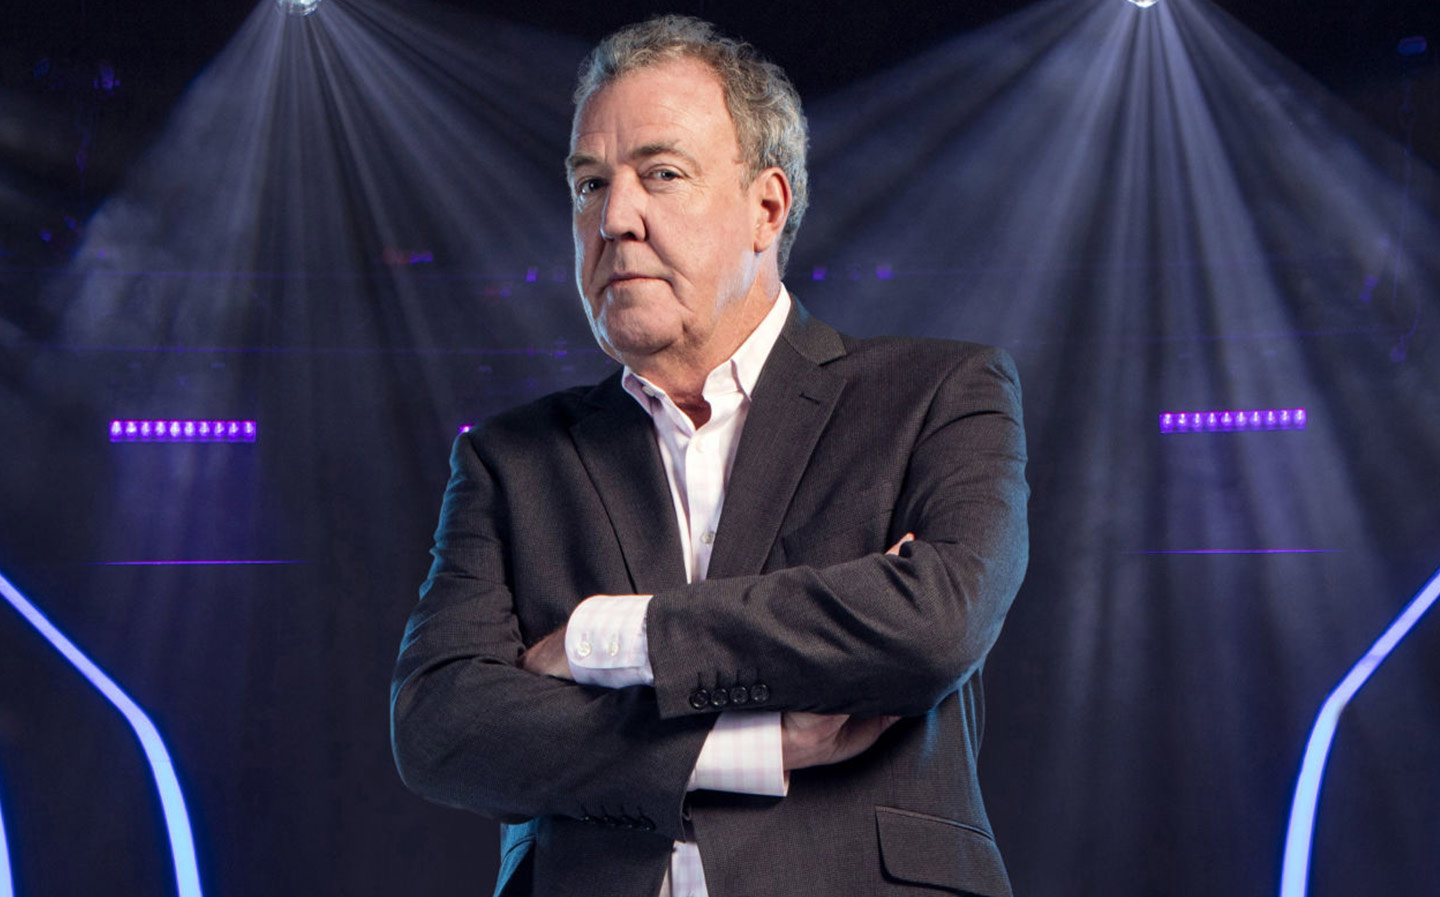 Jeremy Clarkson commissioned for full series of Who Wants to be a Millionaire? in 2019